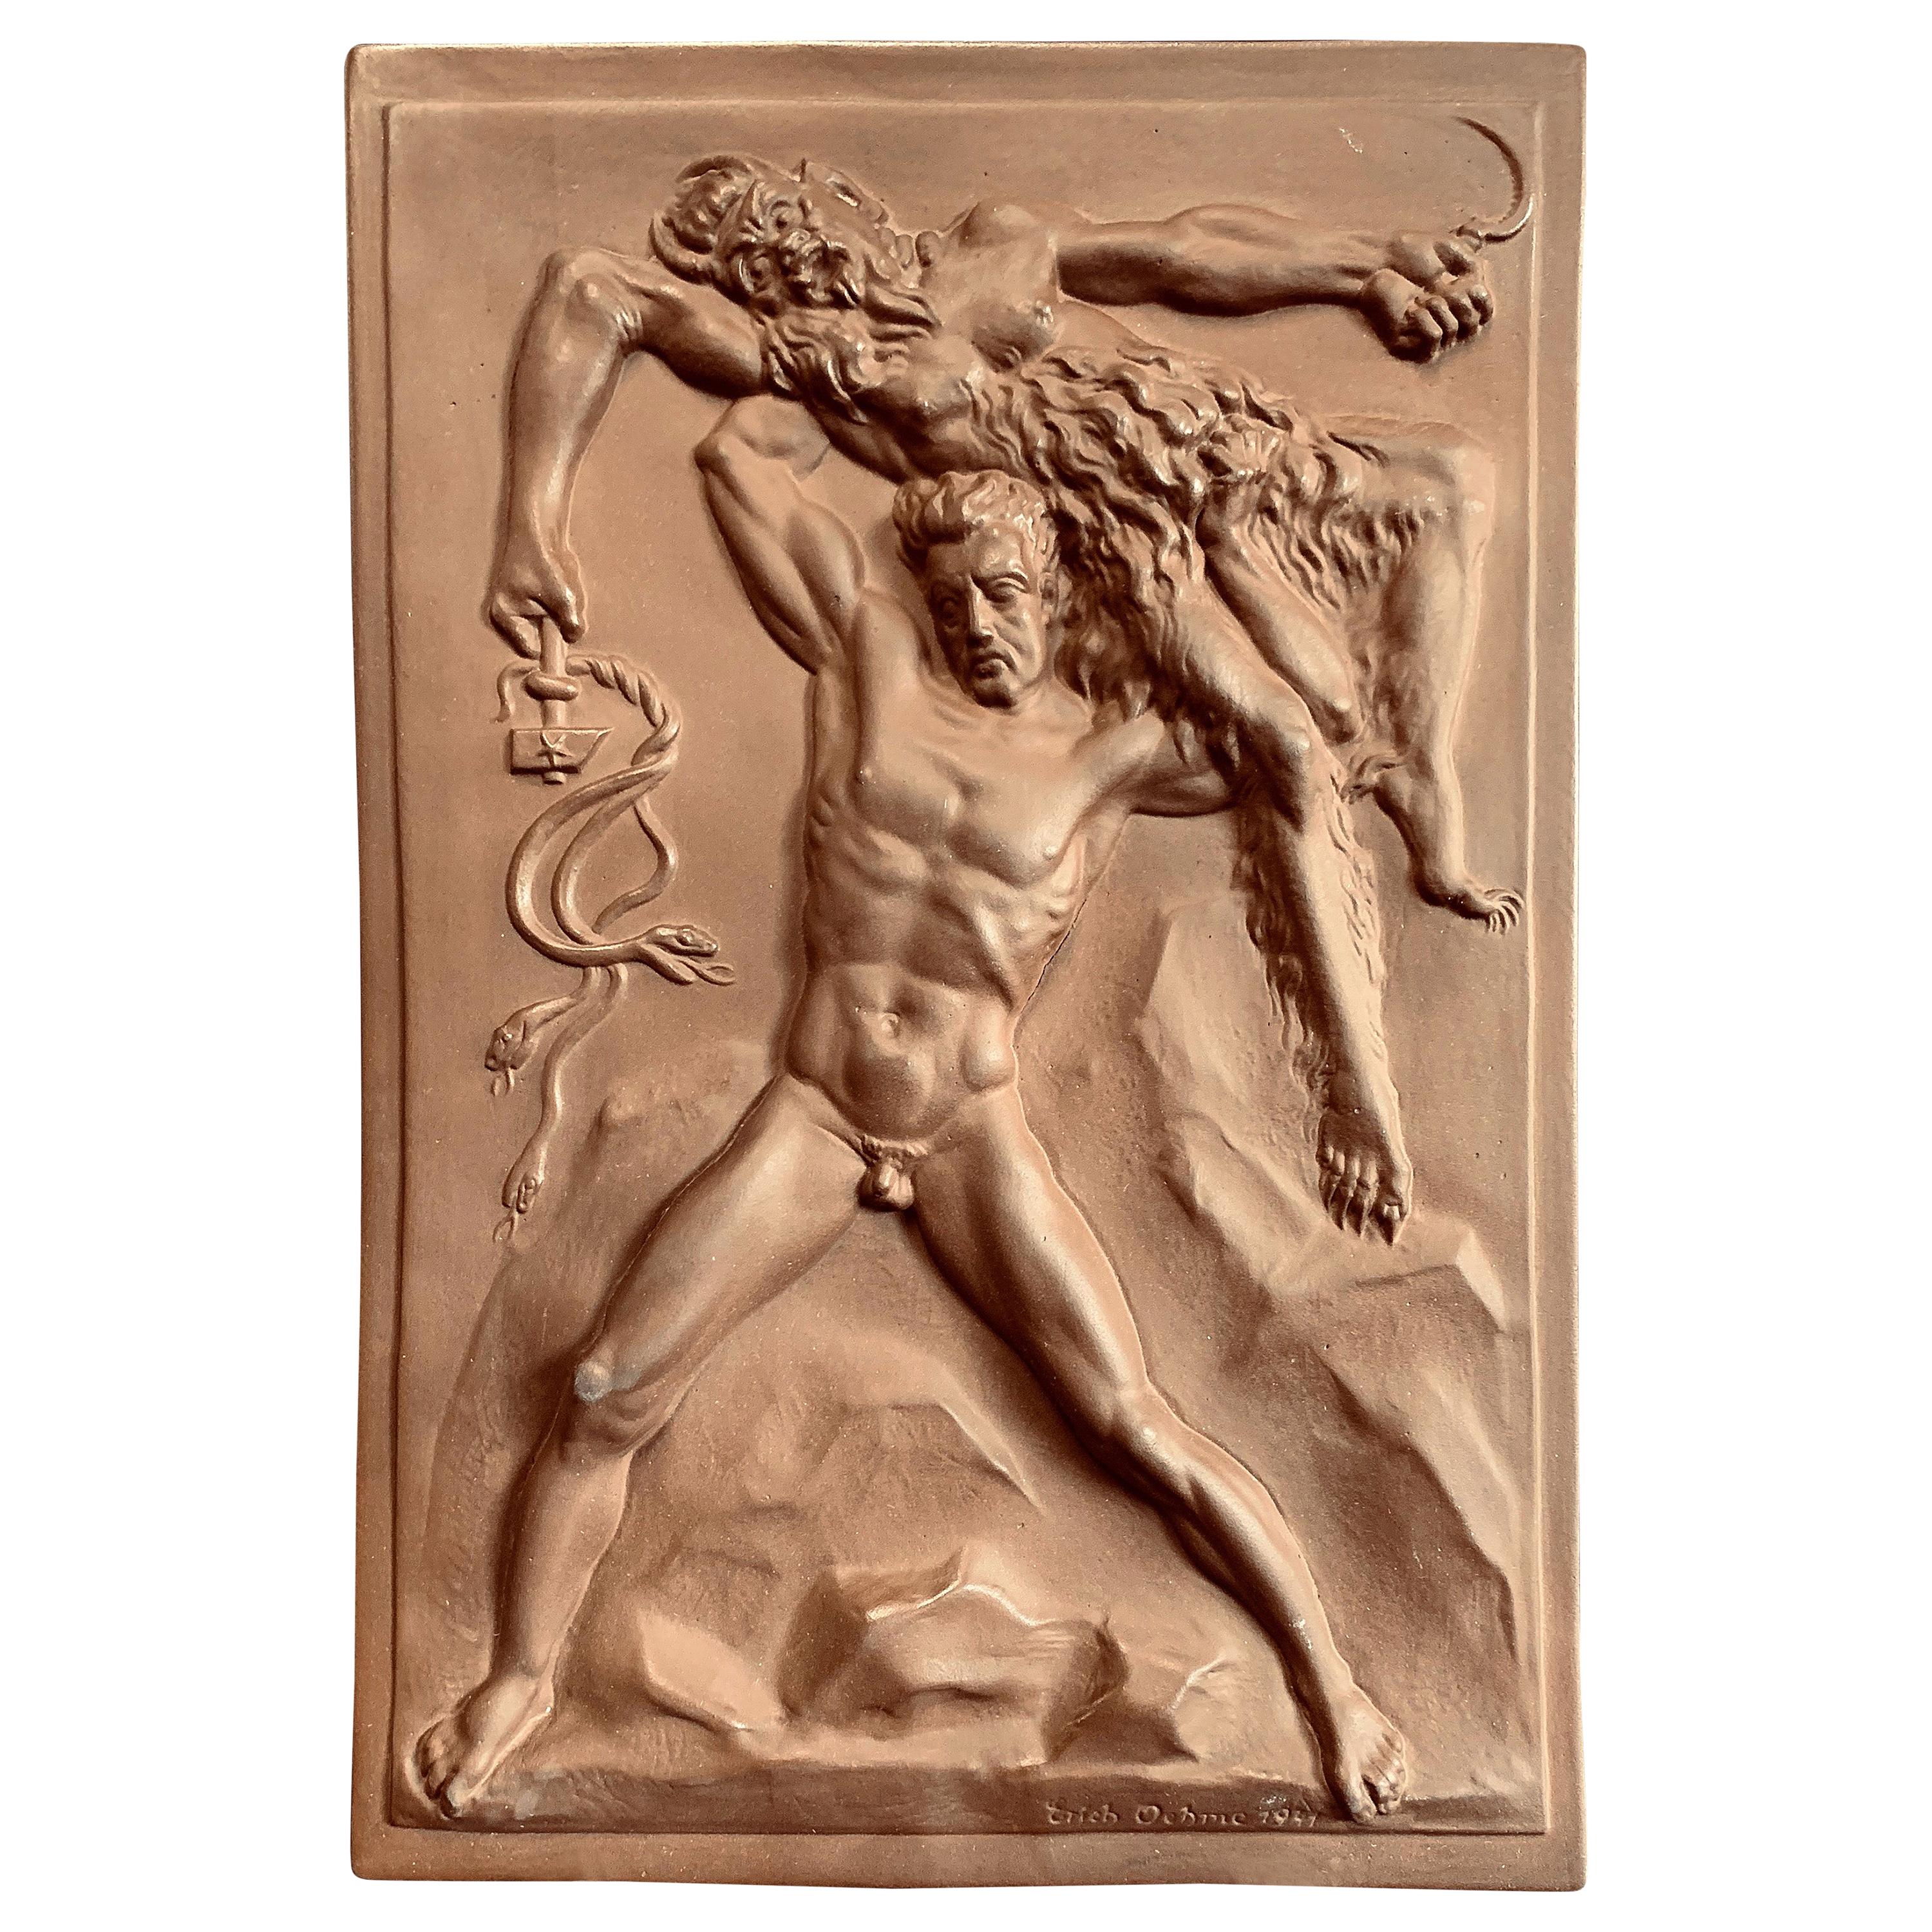 "Germany Triumphing Over the Soviets," Propaganda Bas Relief Sculpture, Meissen